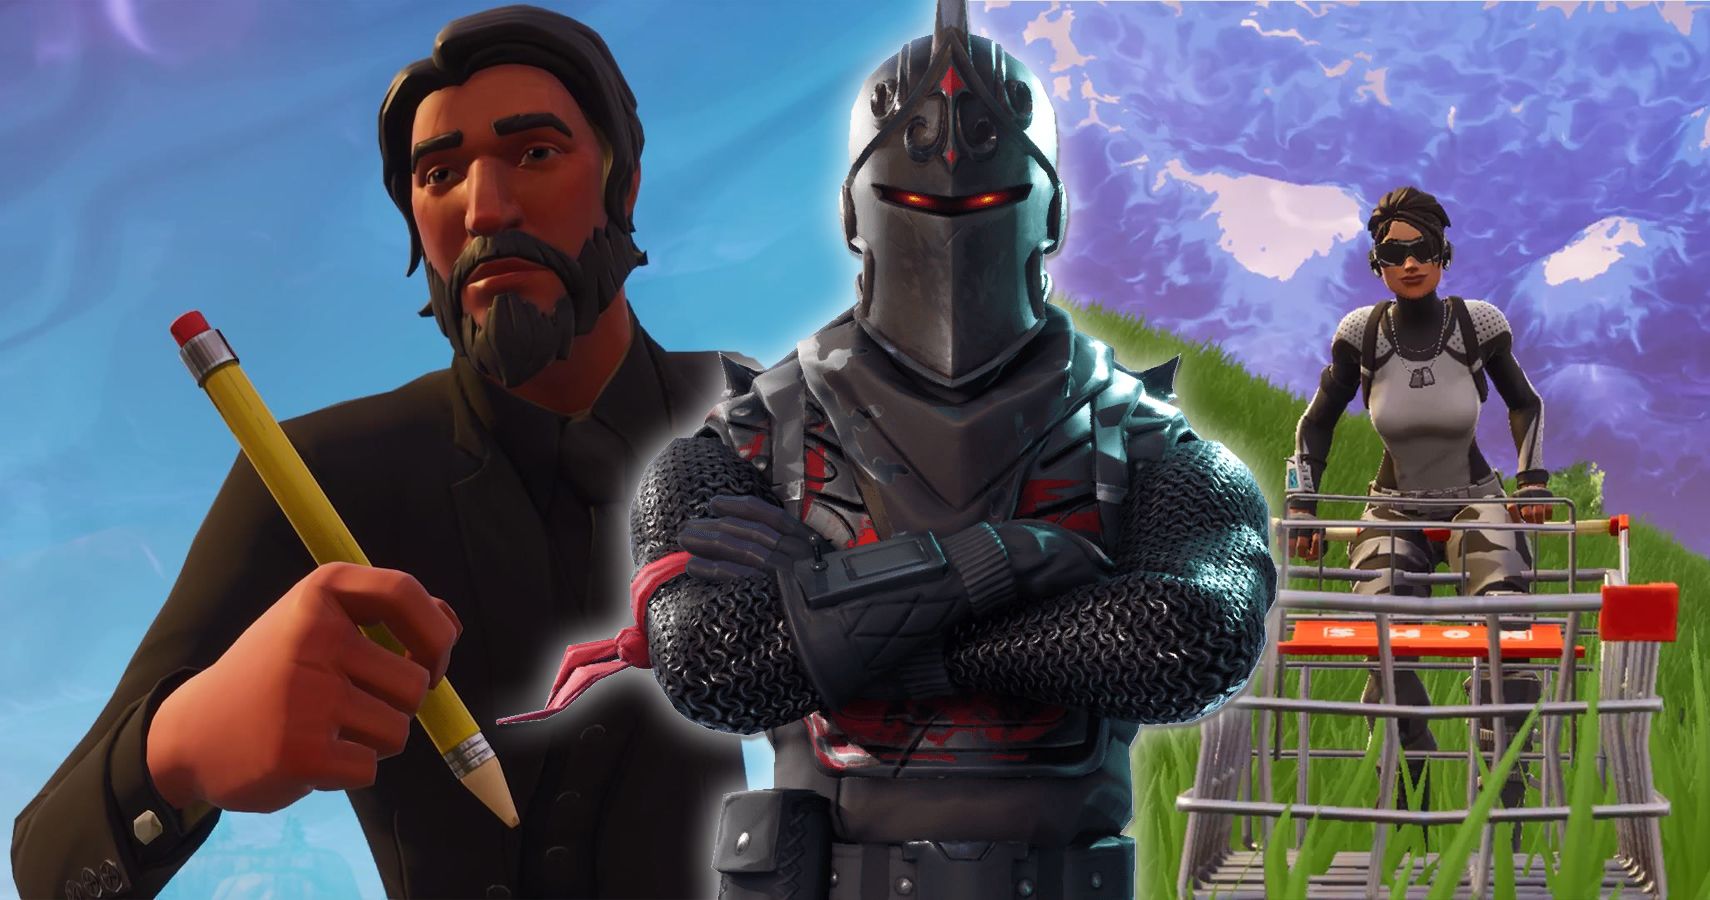 fortnite 10 things pros do to win victory royale and 10 that only noobs do - mountain expert fortnite